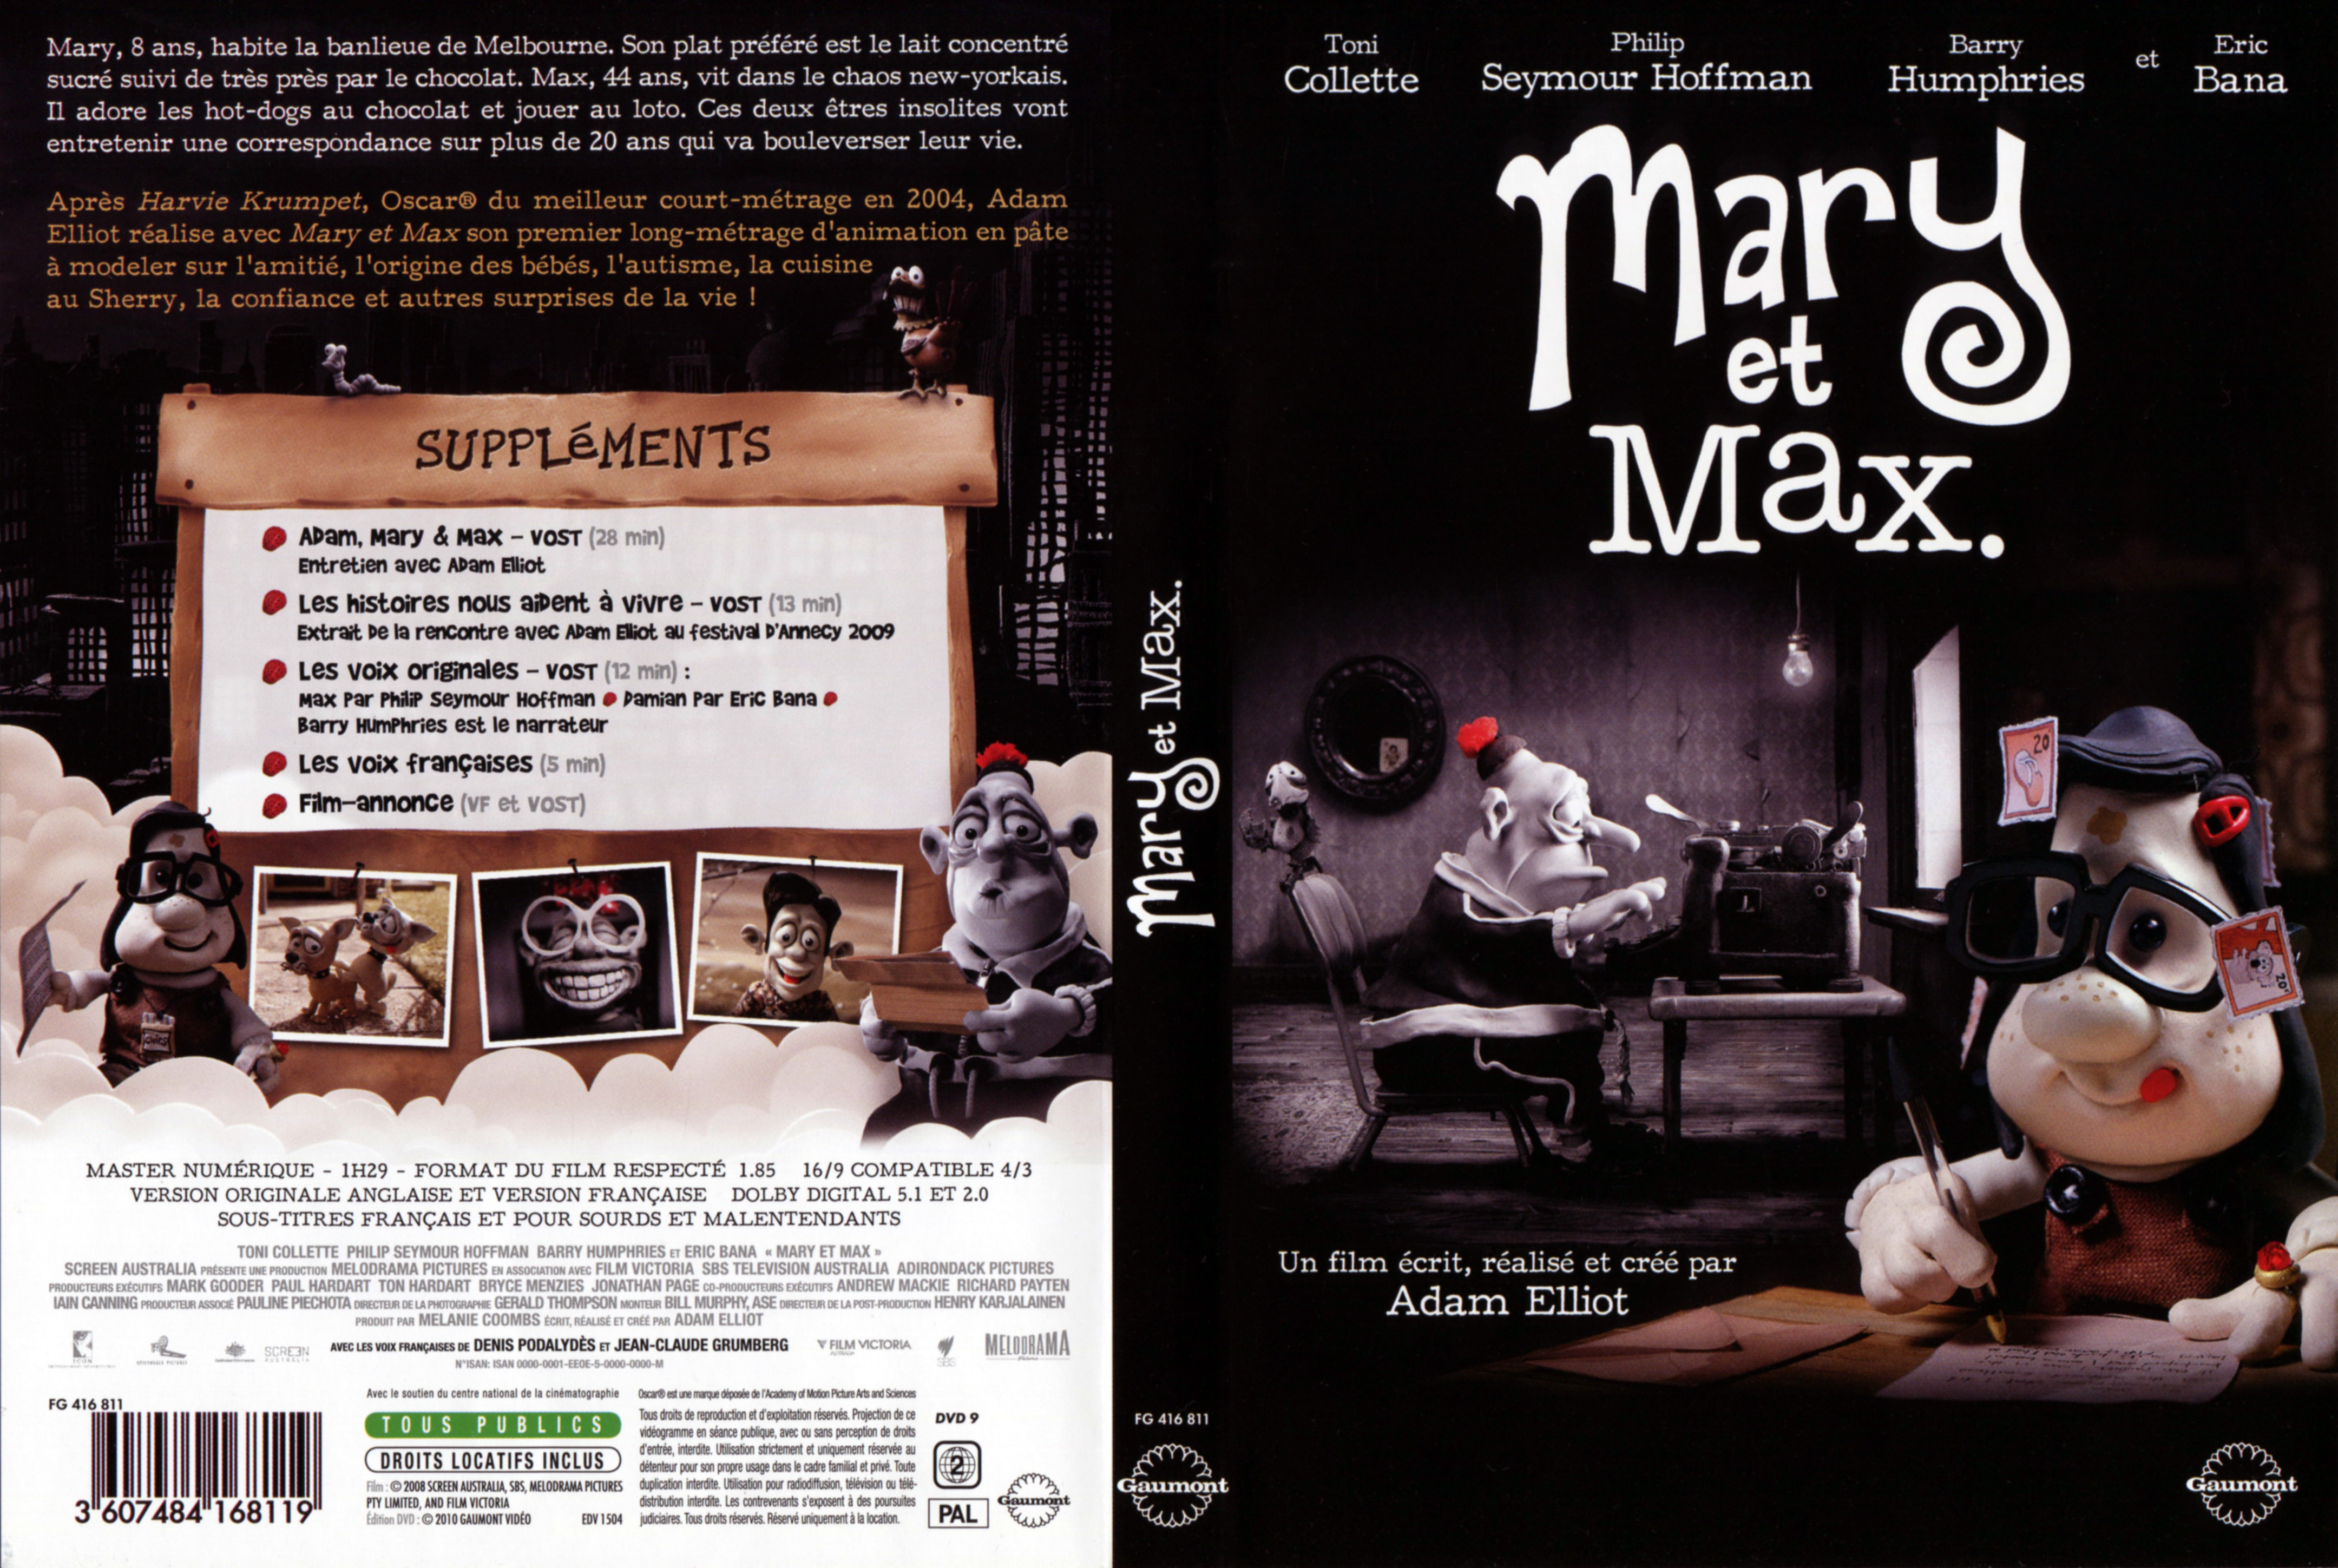 Jaquette DVD Mary et Max v2